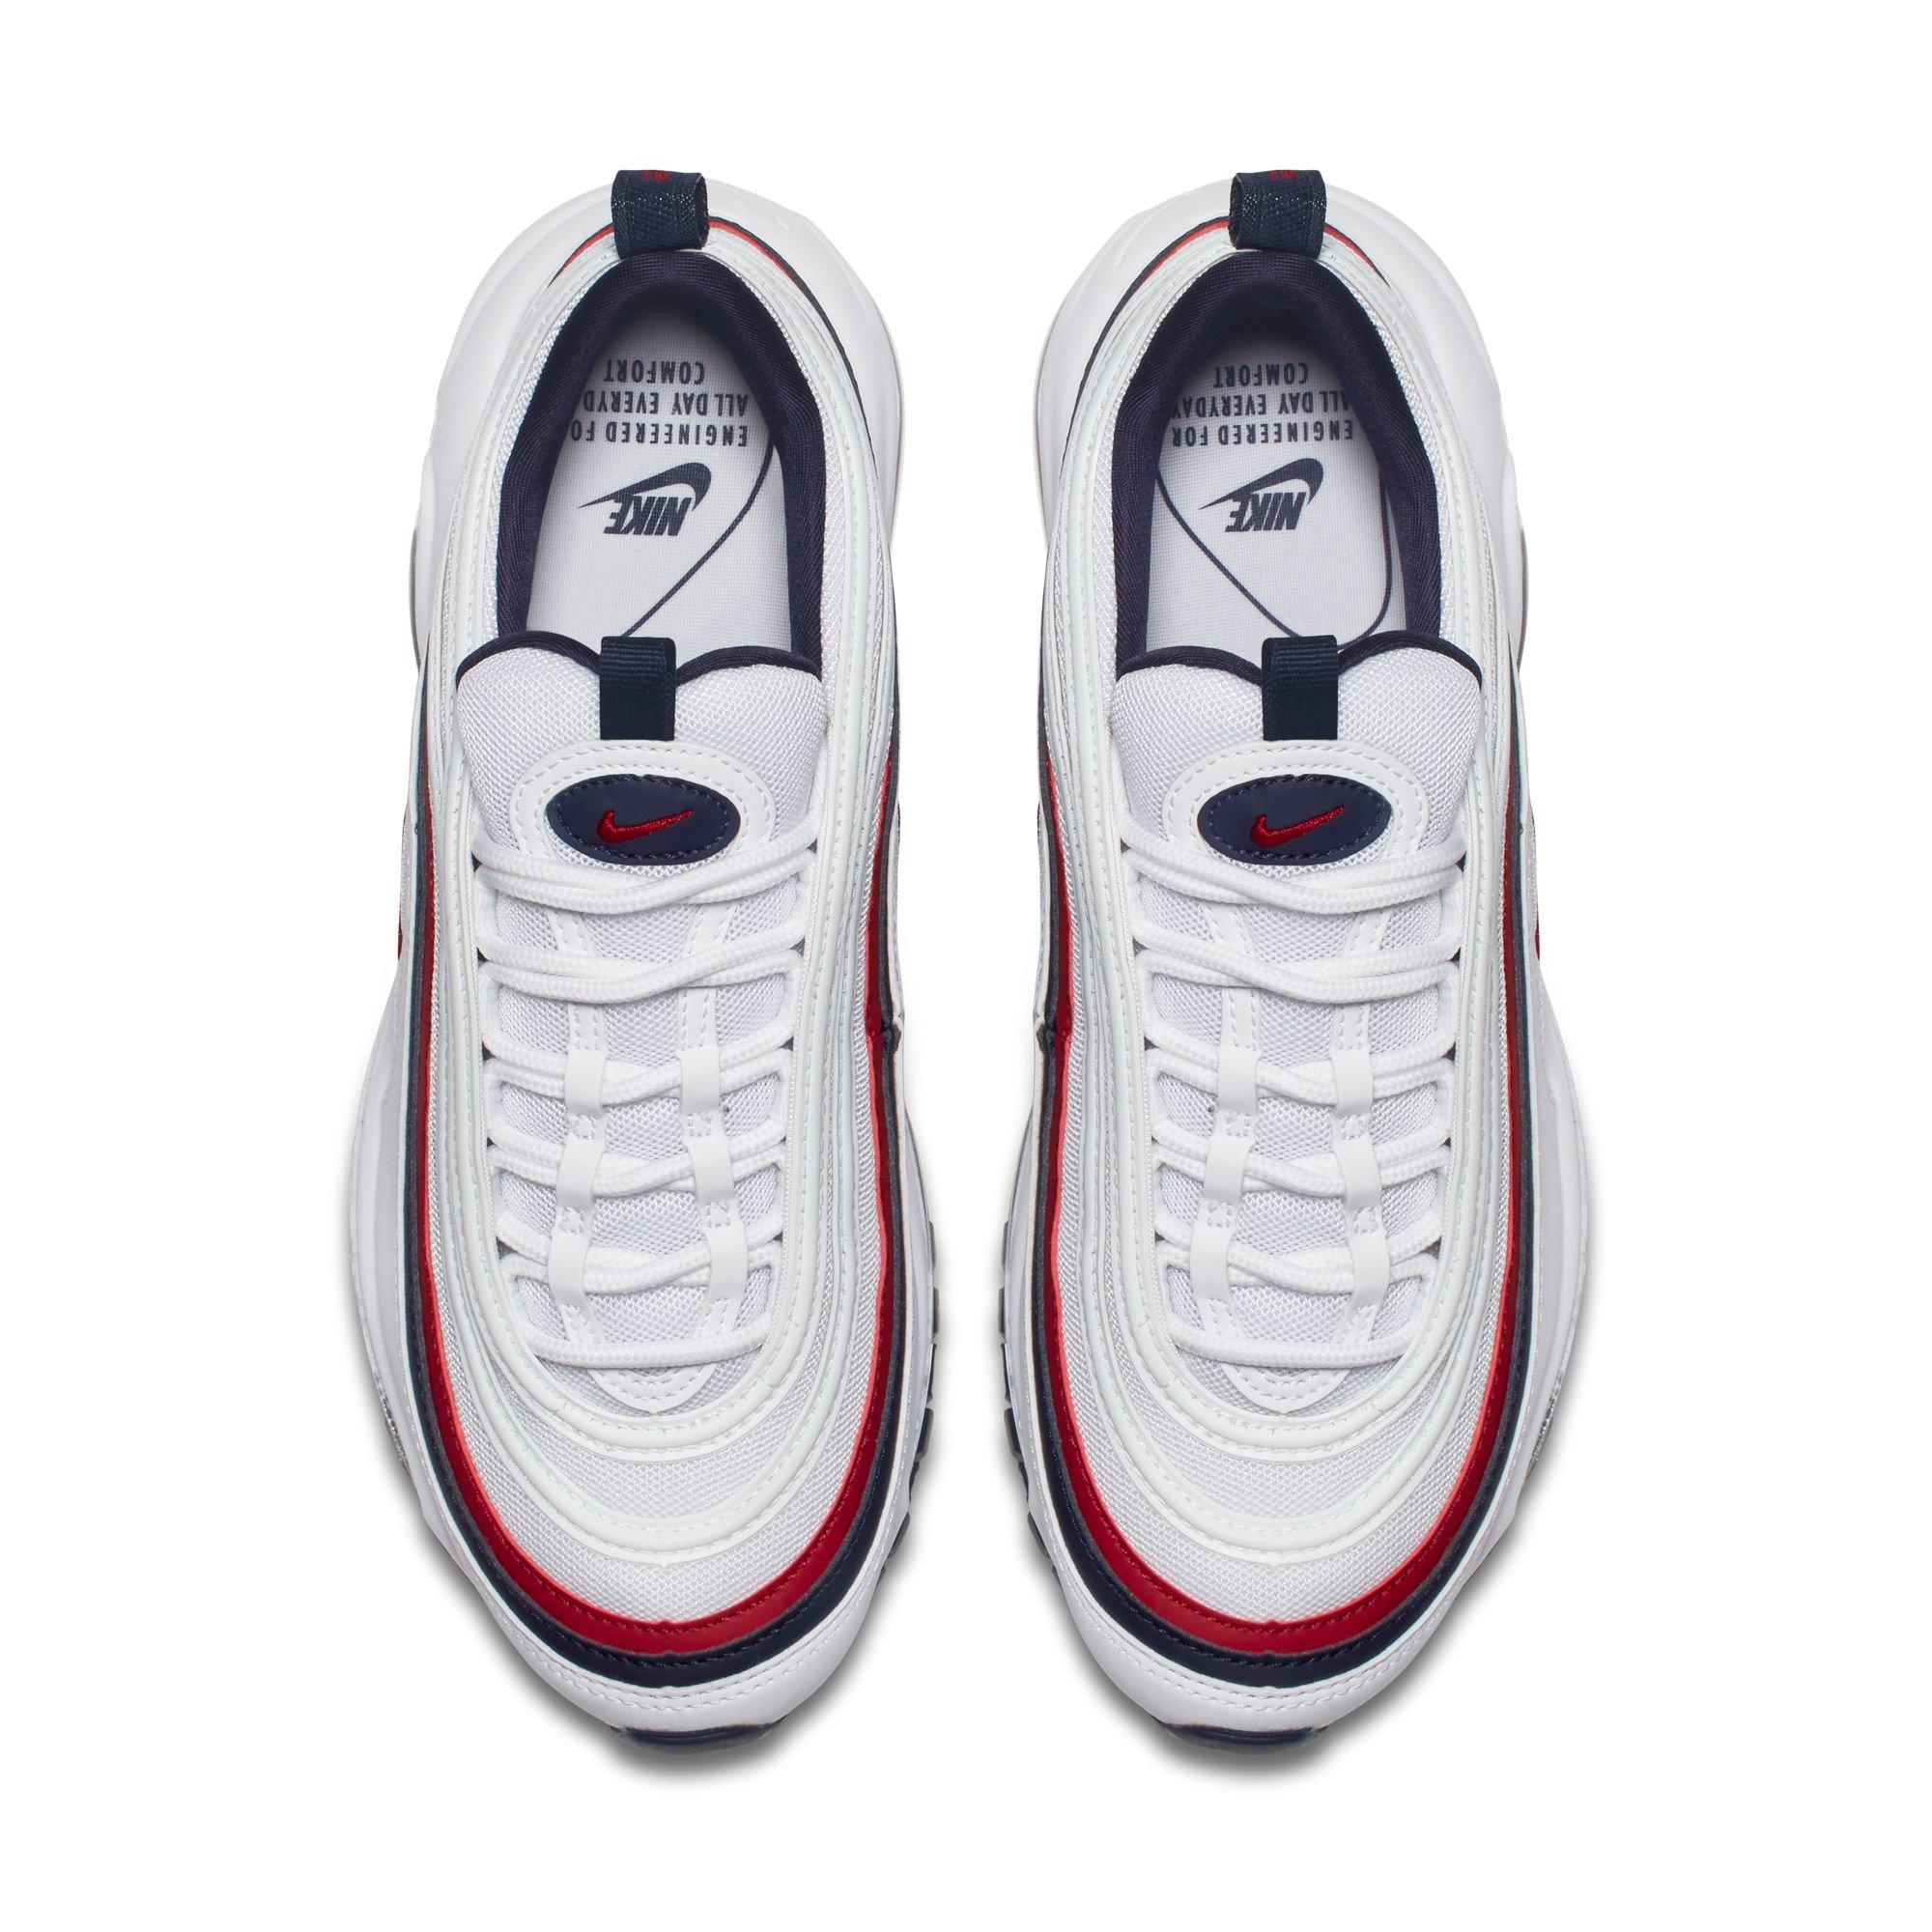 nike air max 97 womens red white and blue